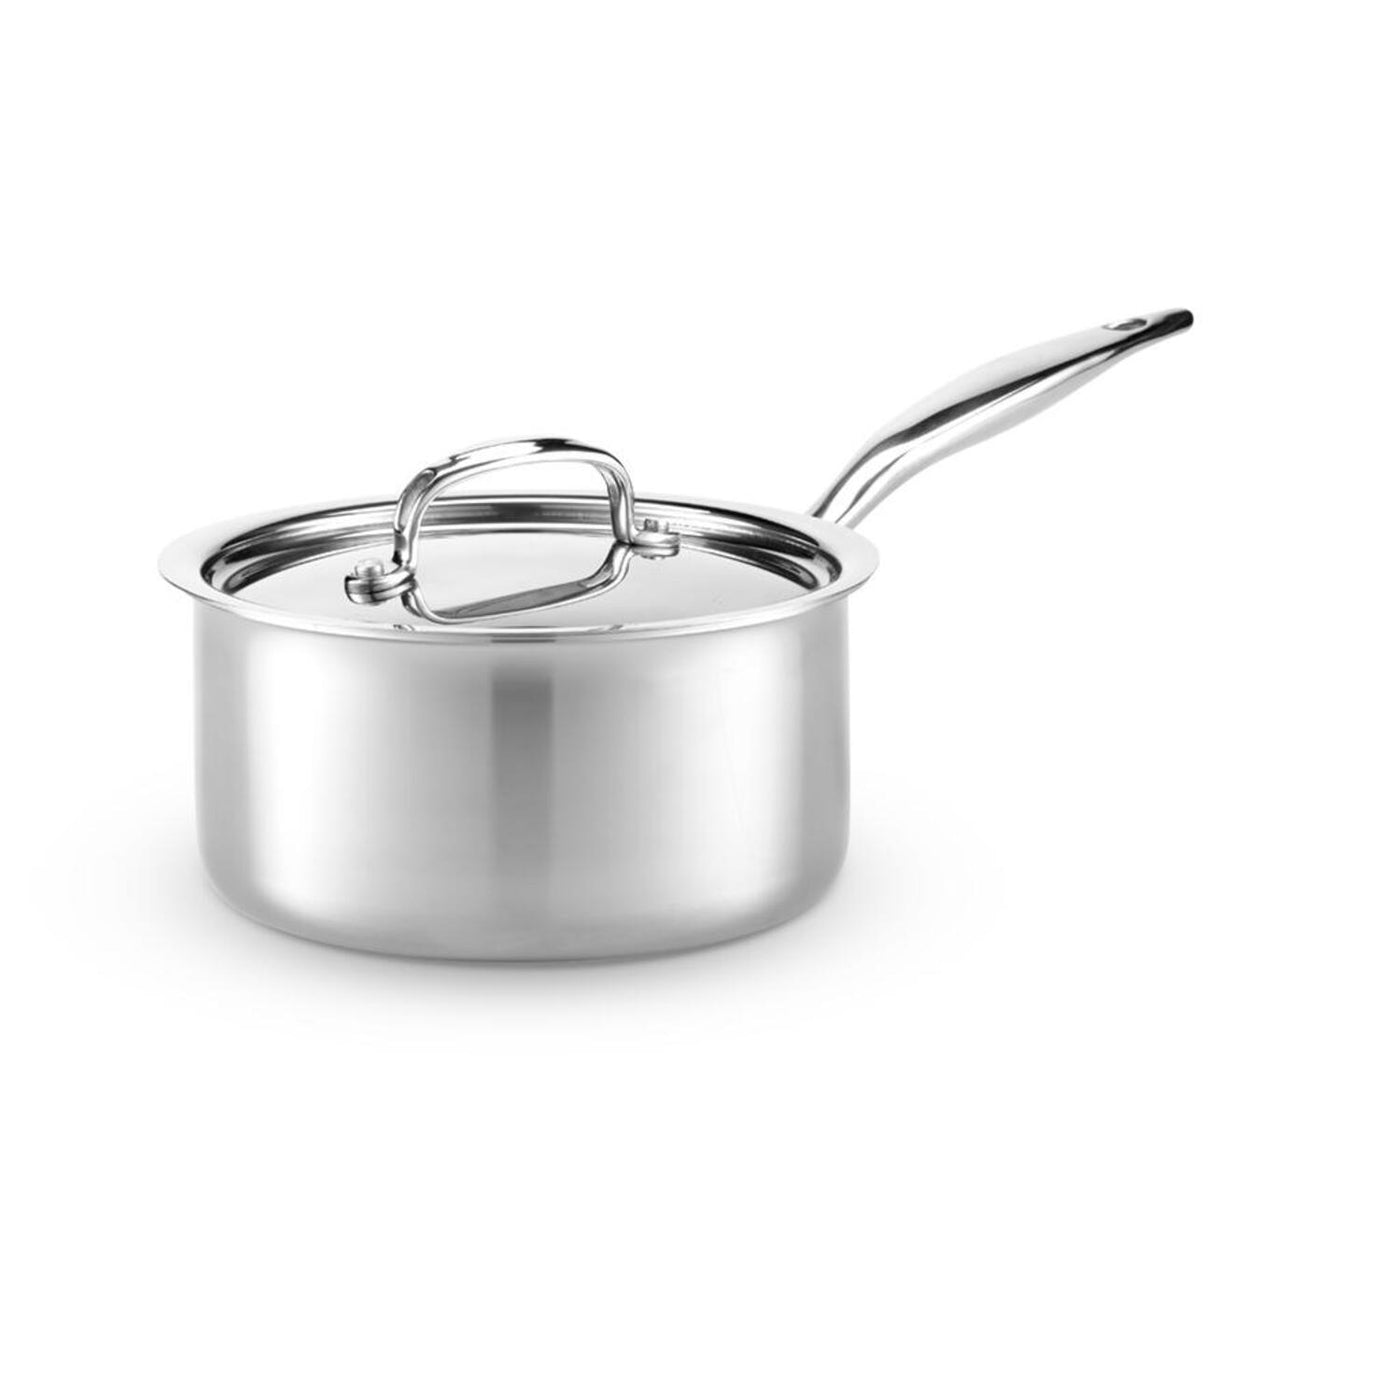 Made In Cookware - 8 Quart Stainless Steel Stock Pot With Lid - 5 Ply  Stainless Clad - Professional Cookware - Made in Italy - Induction  Compatible